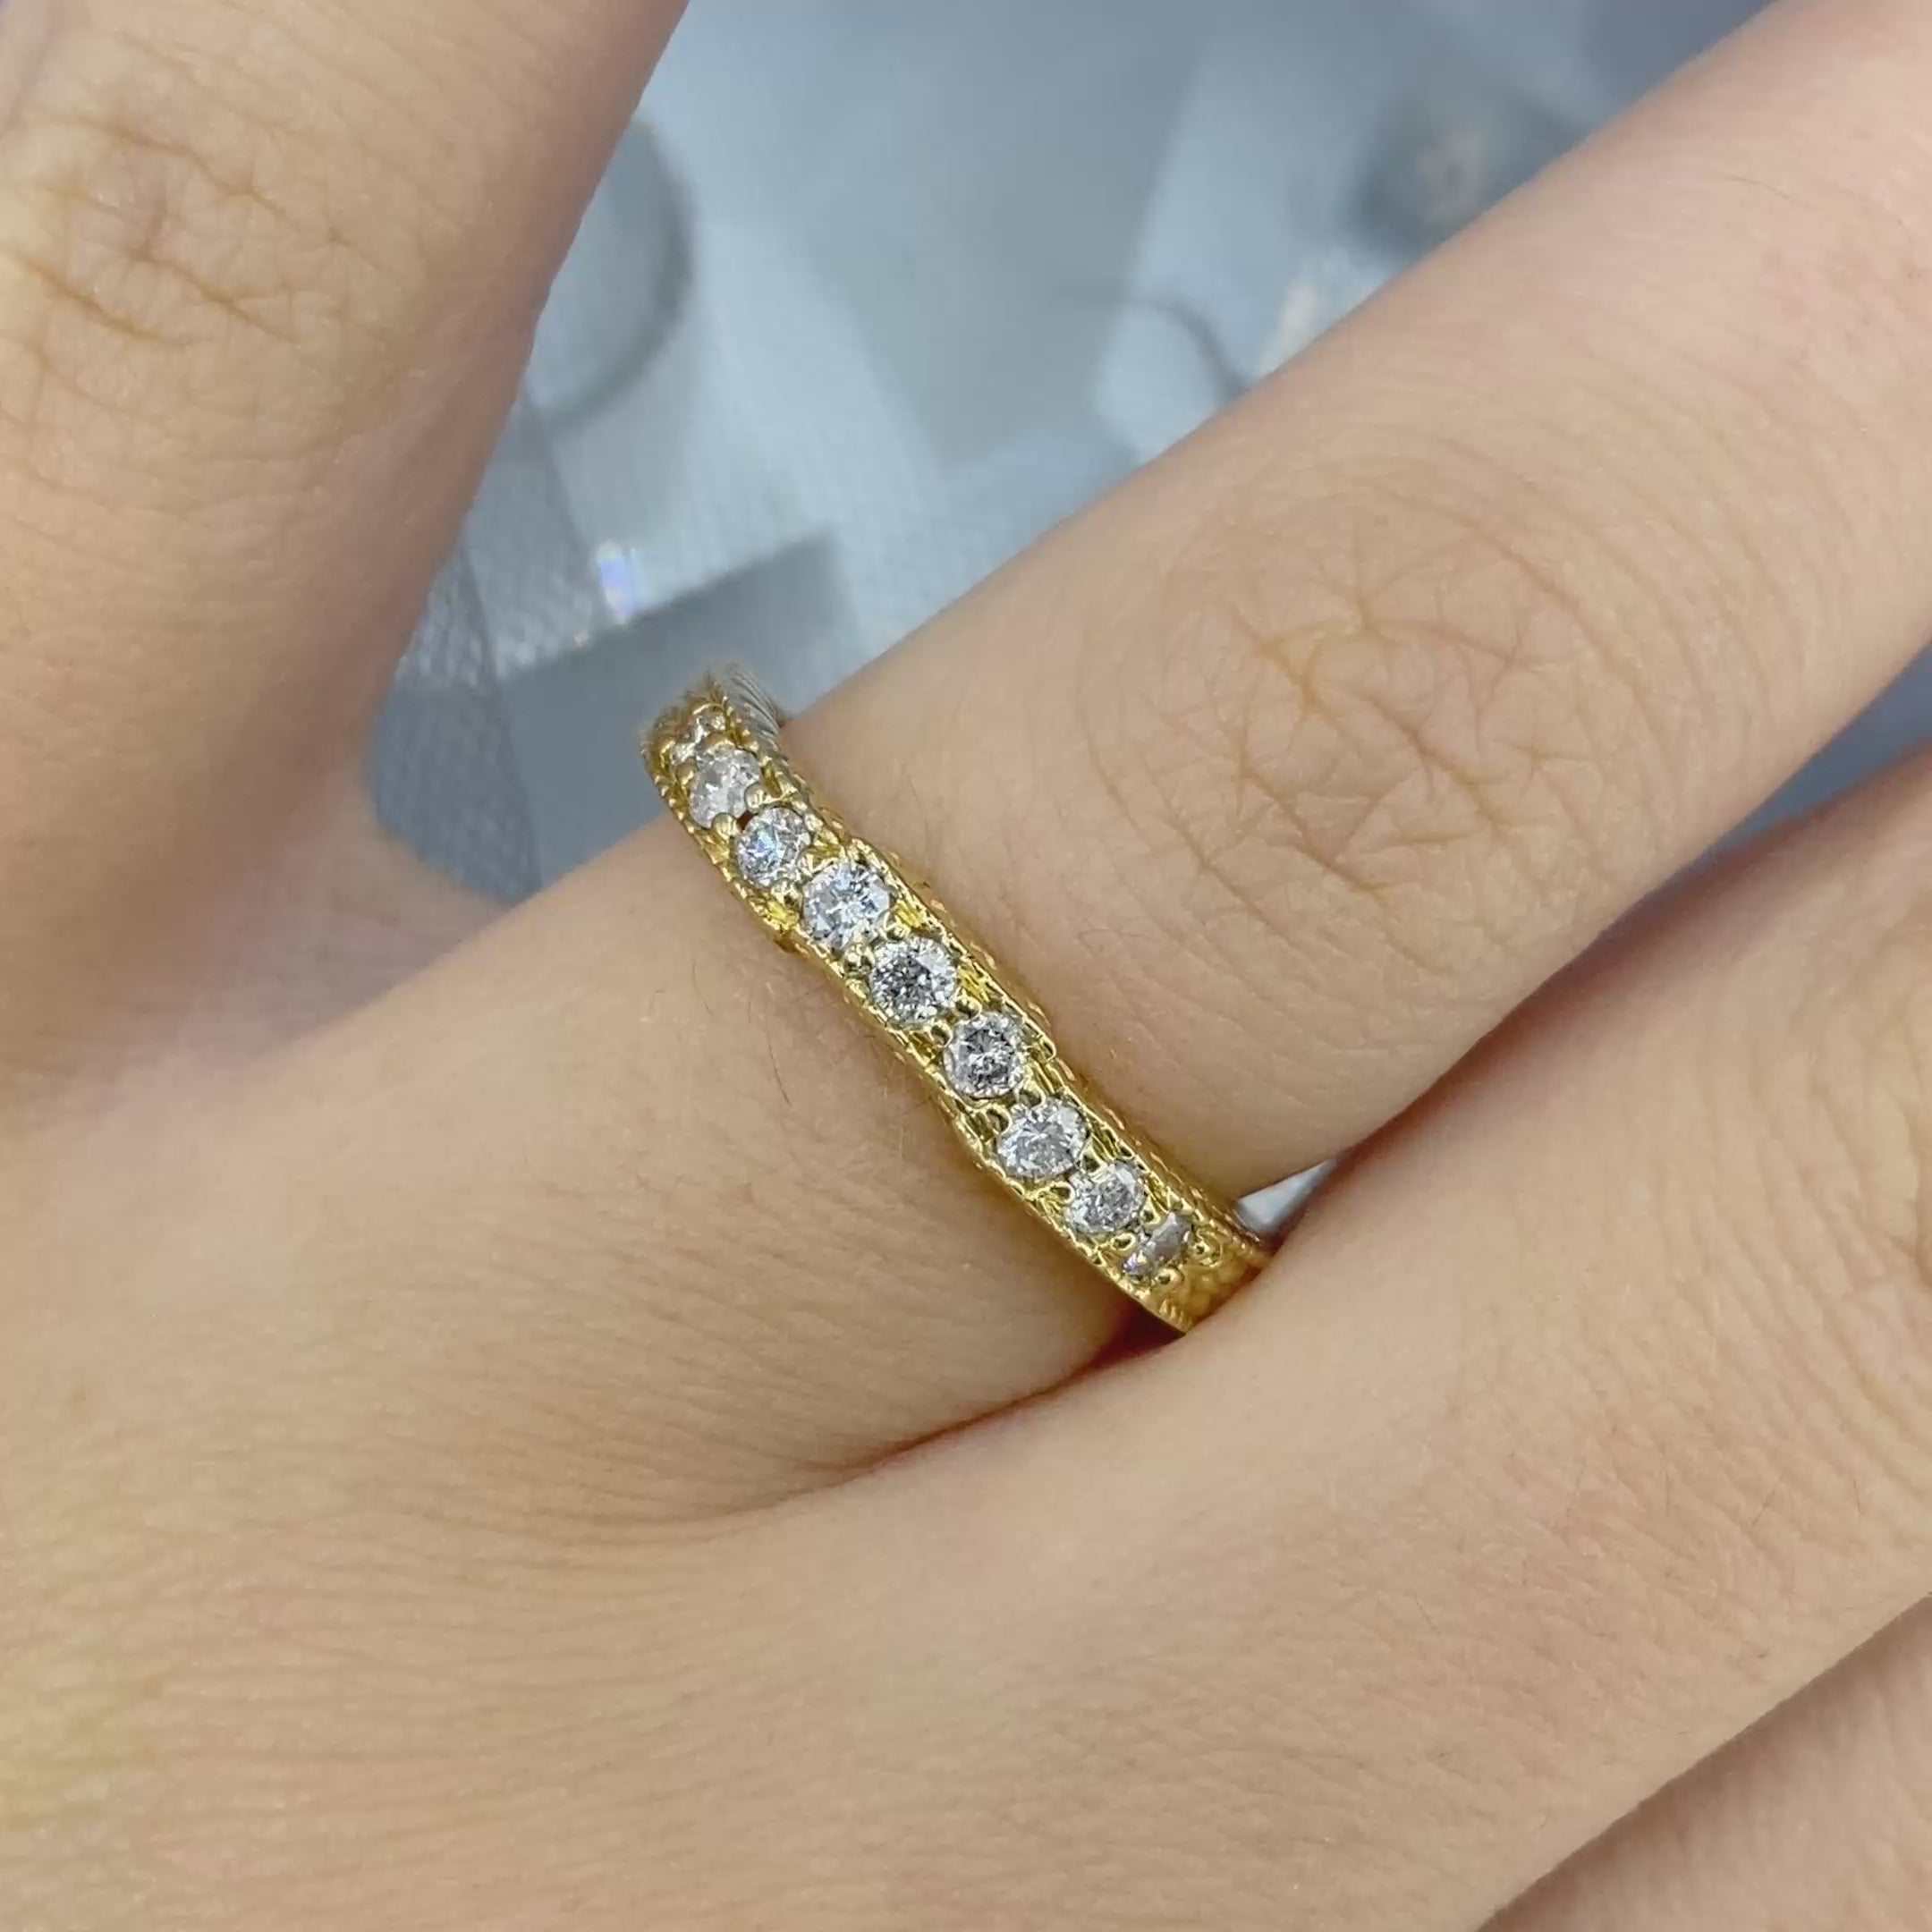 Affordable 0.25CT Round Cut Diamond Wedding Ring in 14KT Yellow Gold